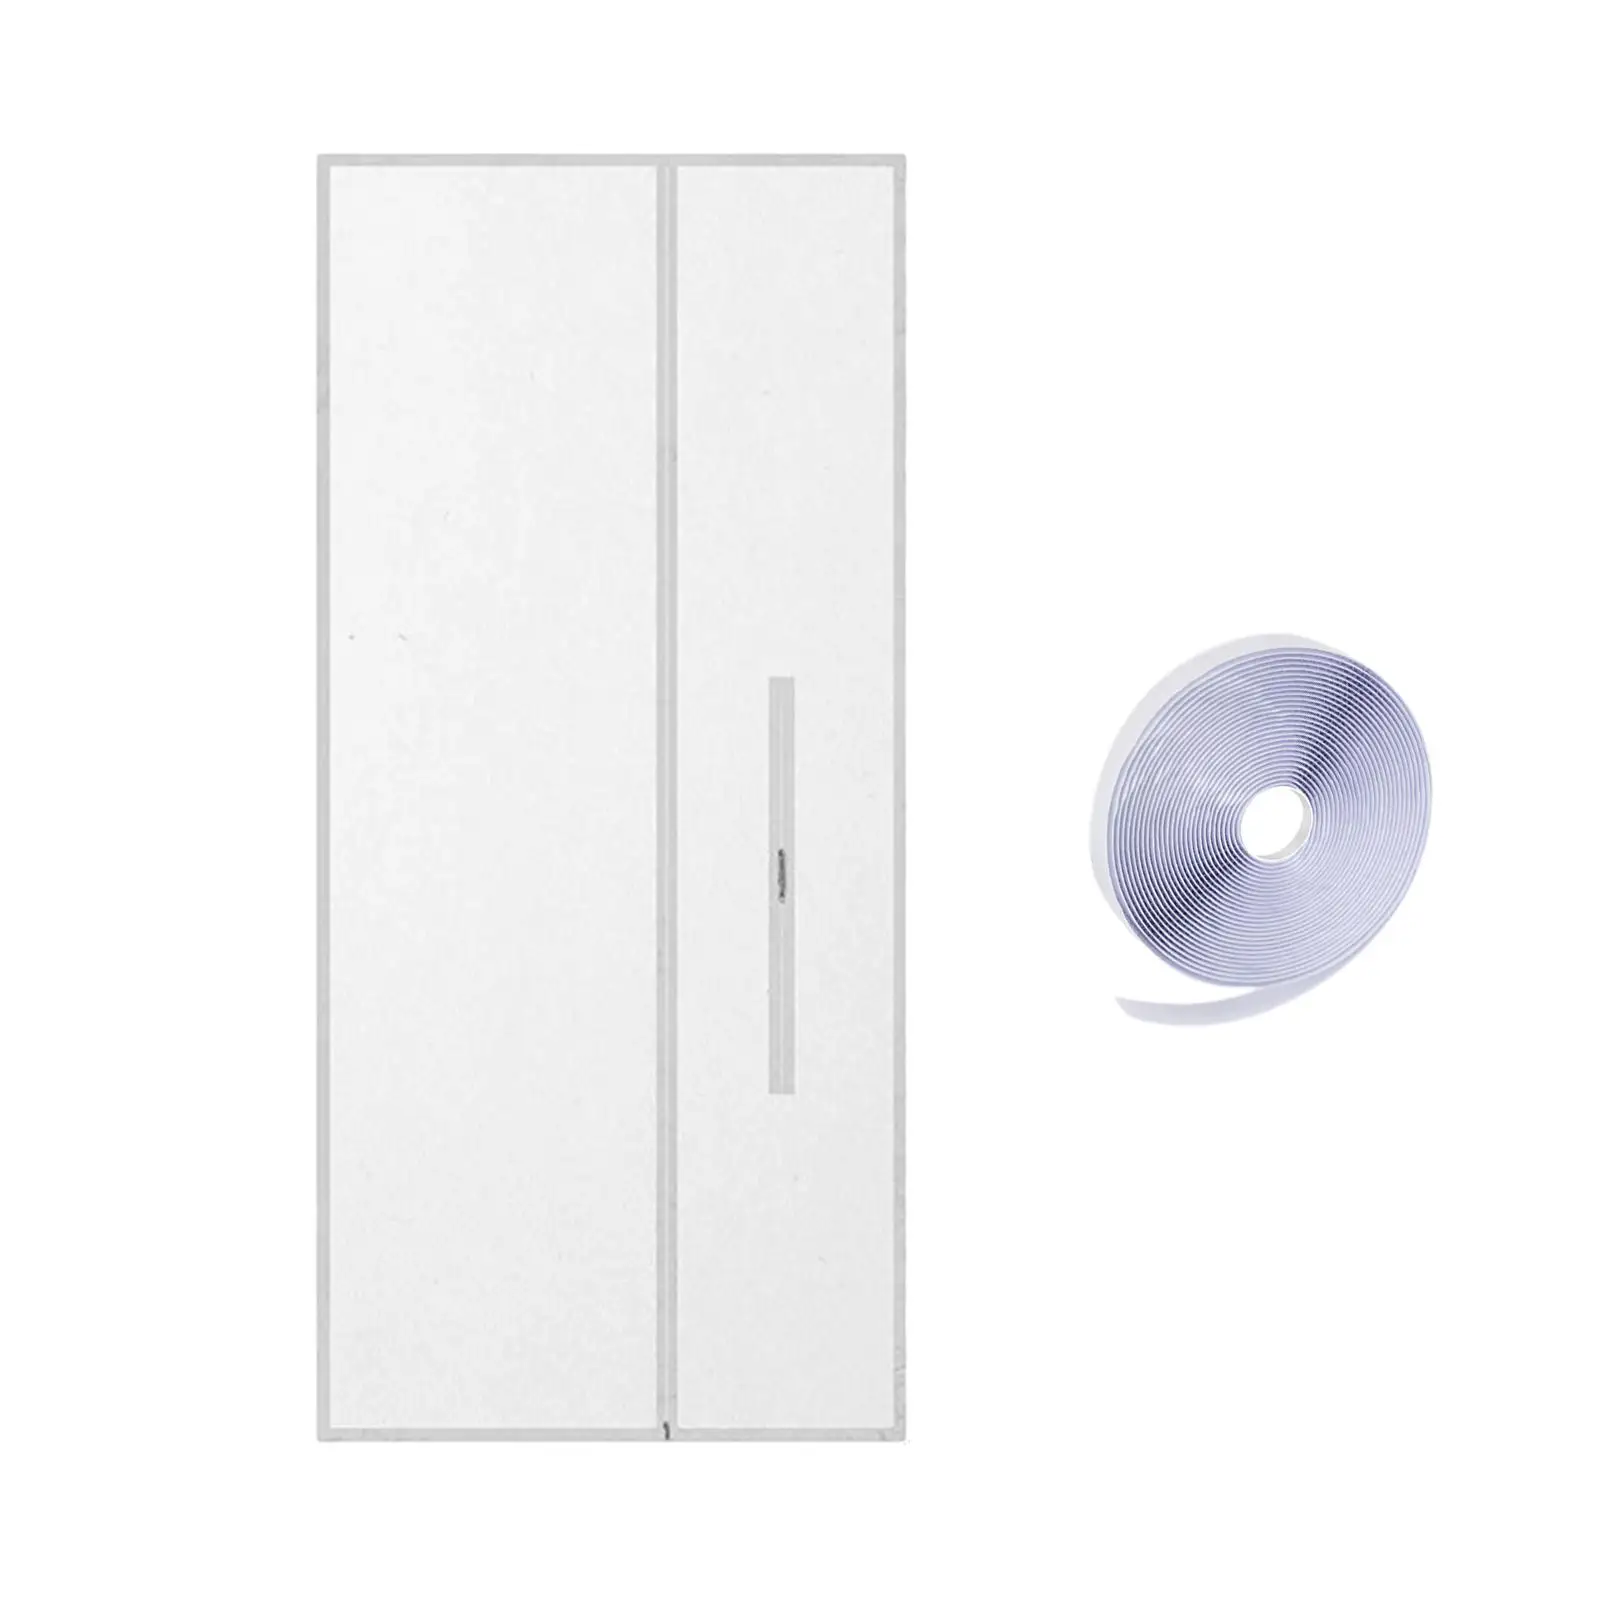 Door Seal for Portable Air Conditioner and Tumble Dryer 87.7`` x 35.4`` Easy to Install for Home Bathroom